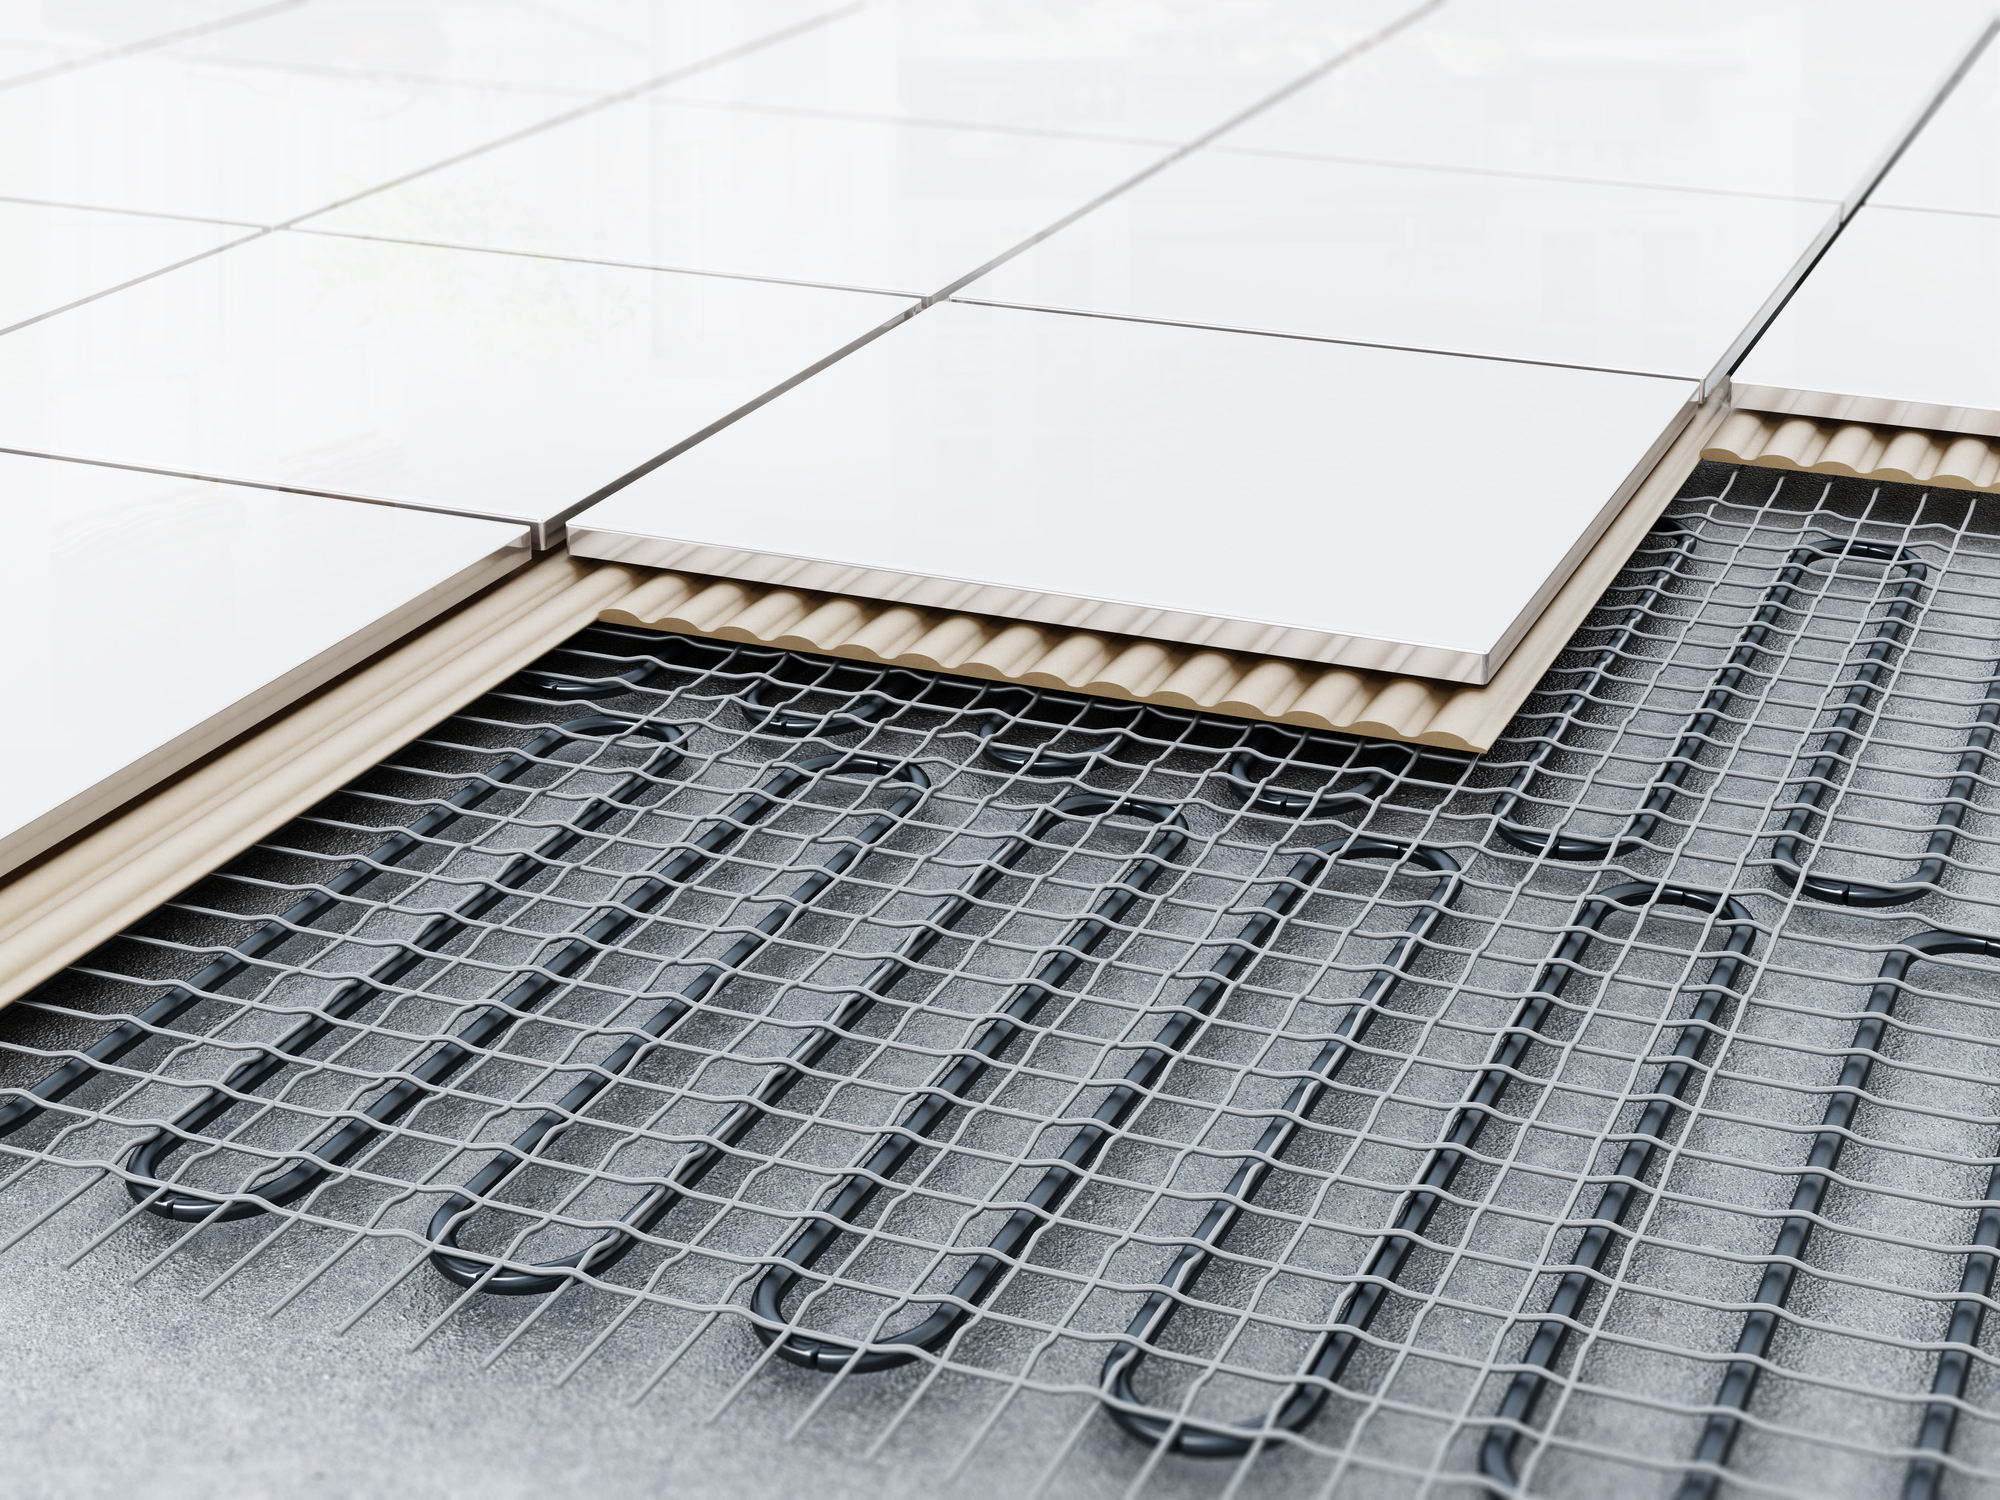 What Are the Benefits of Underfloor Heating in Your Hotel?